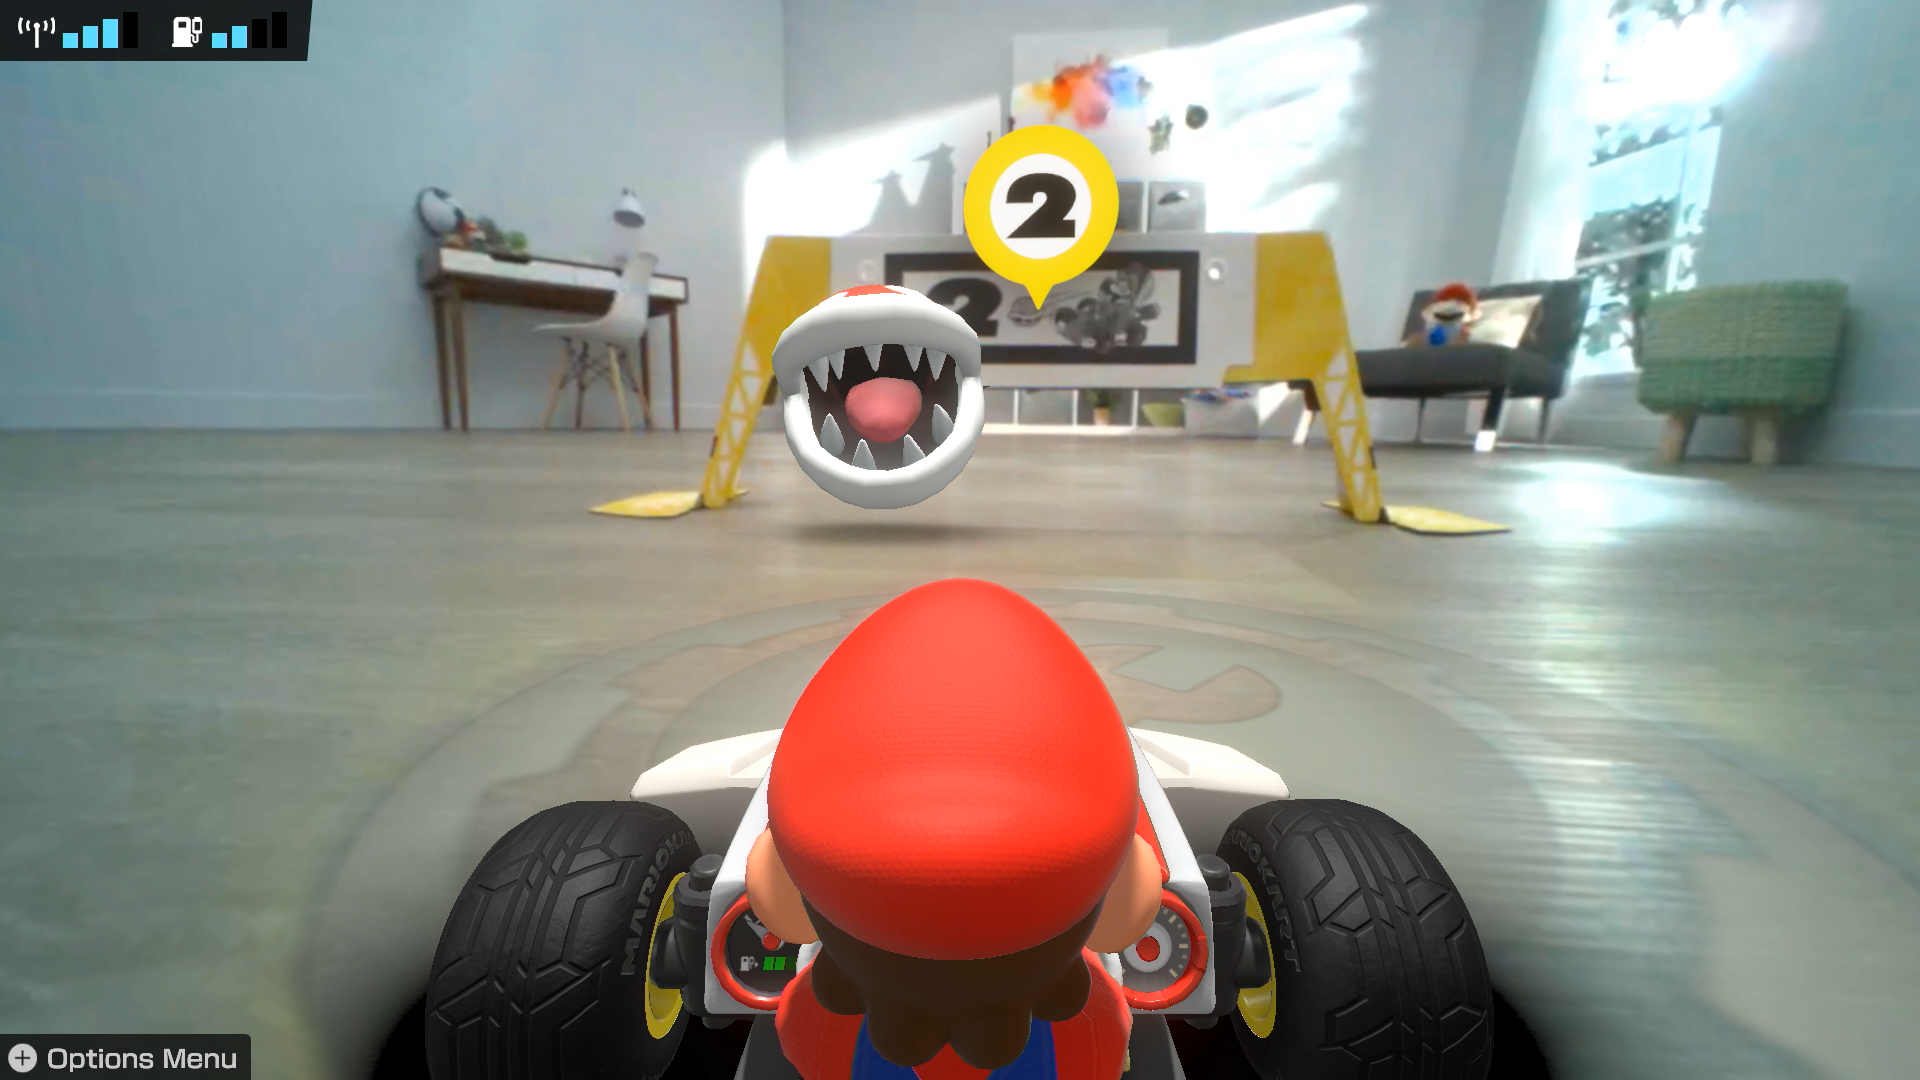 Velan Studios says Mario Kart Live: Home Circuit was inspired by